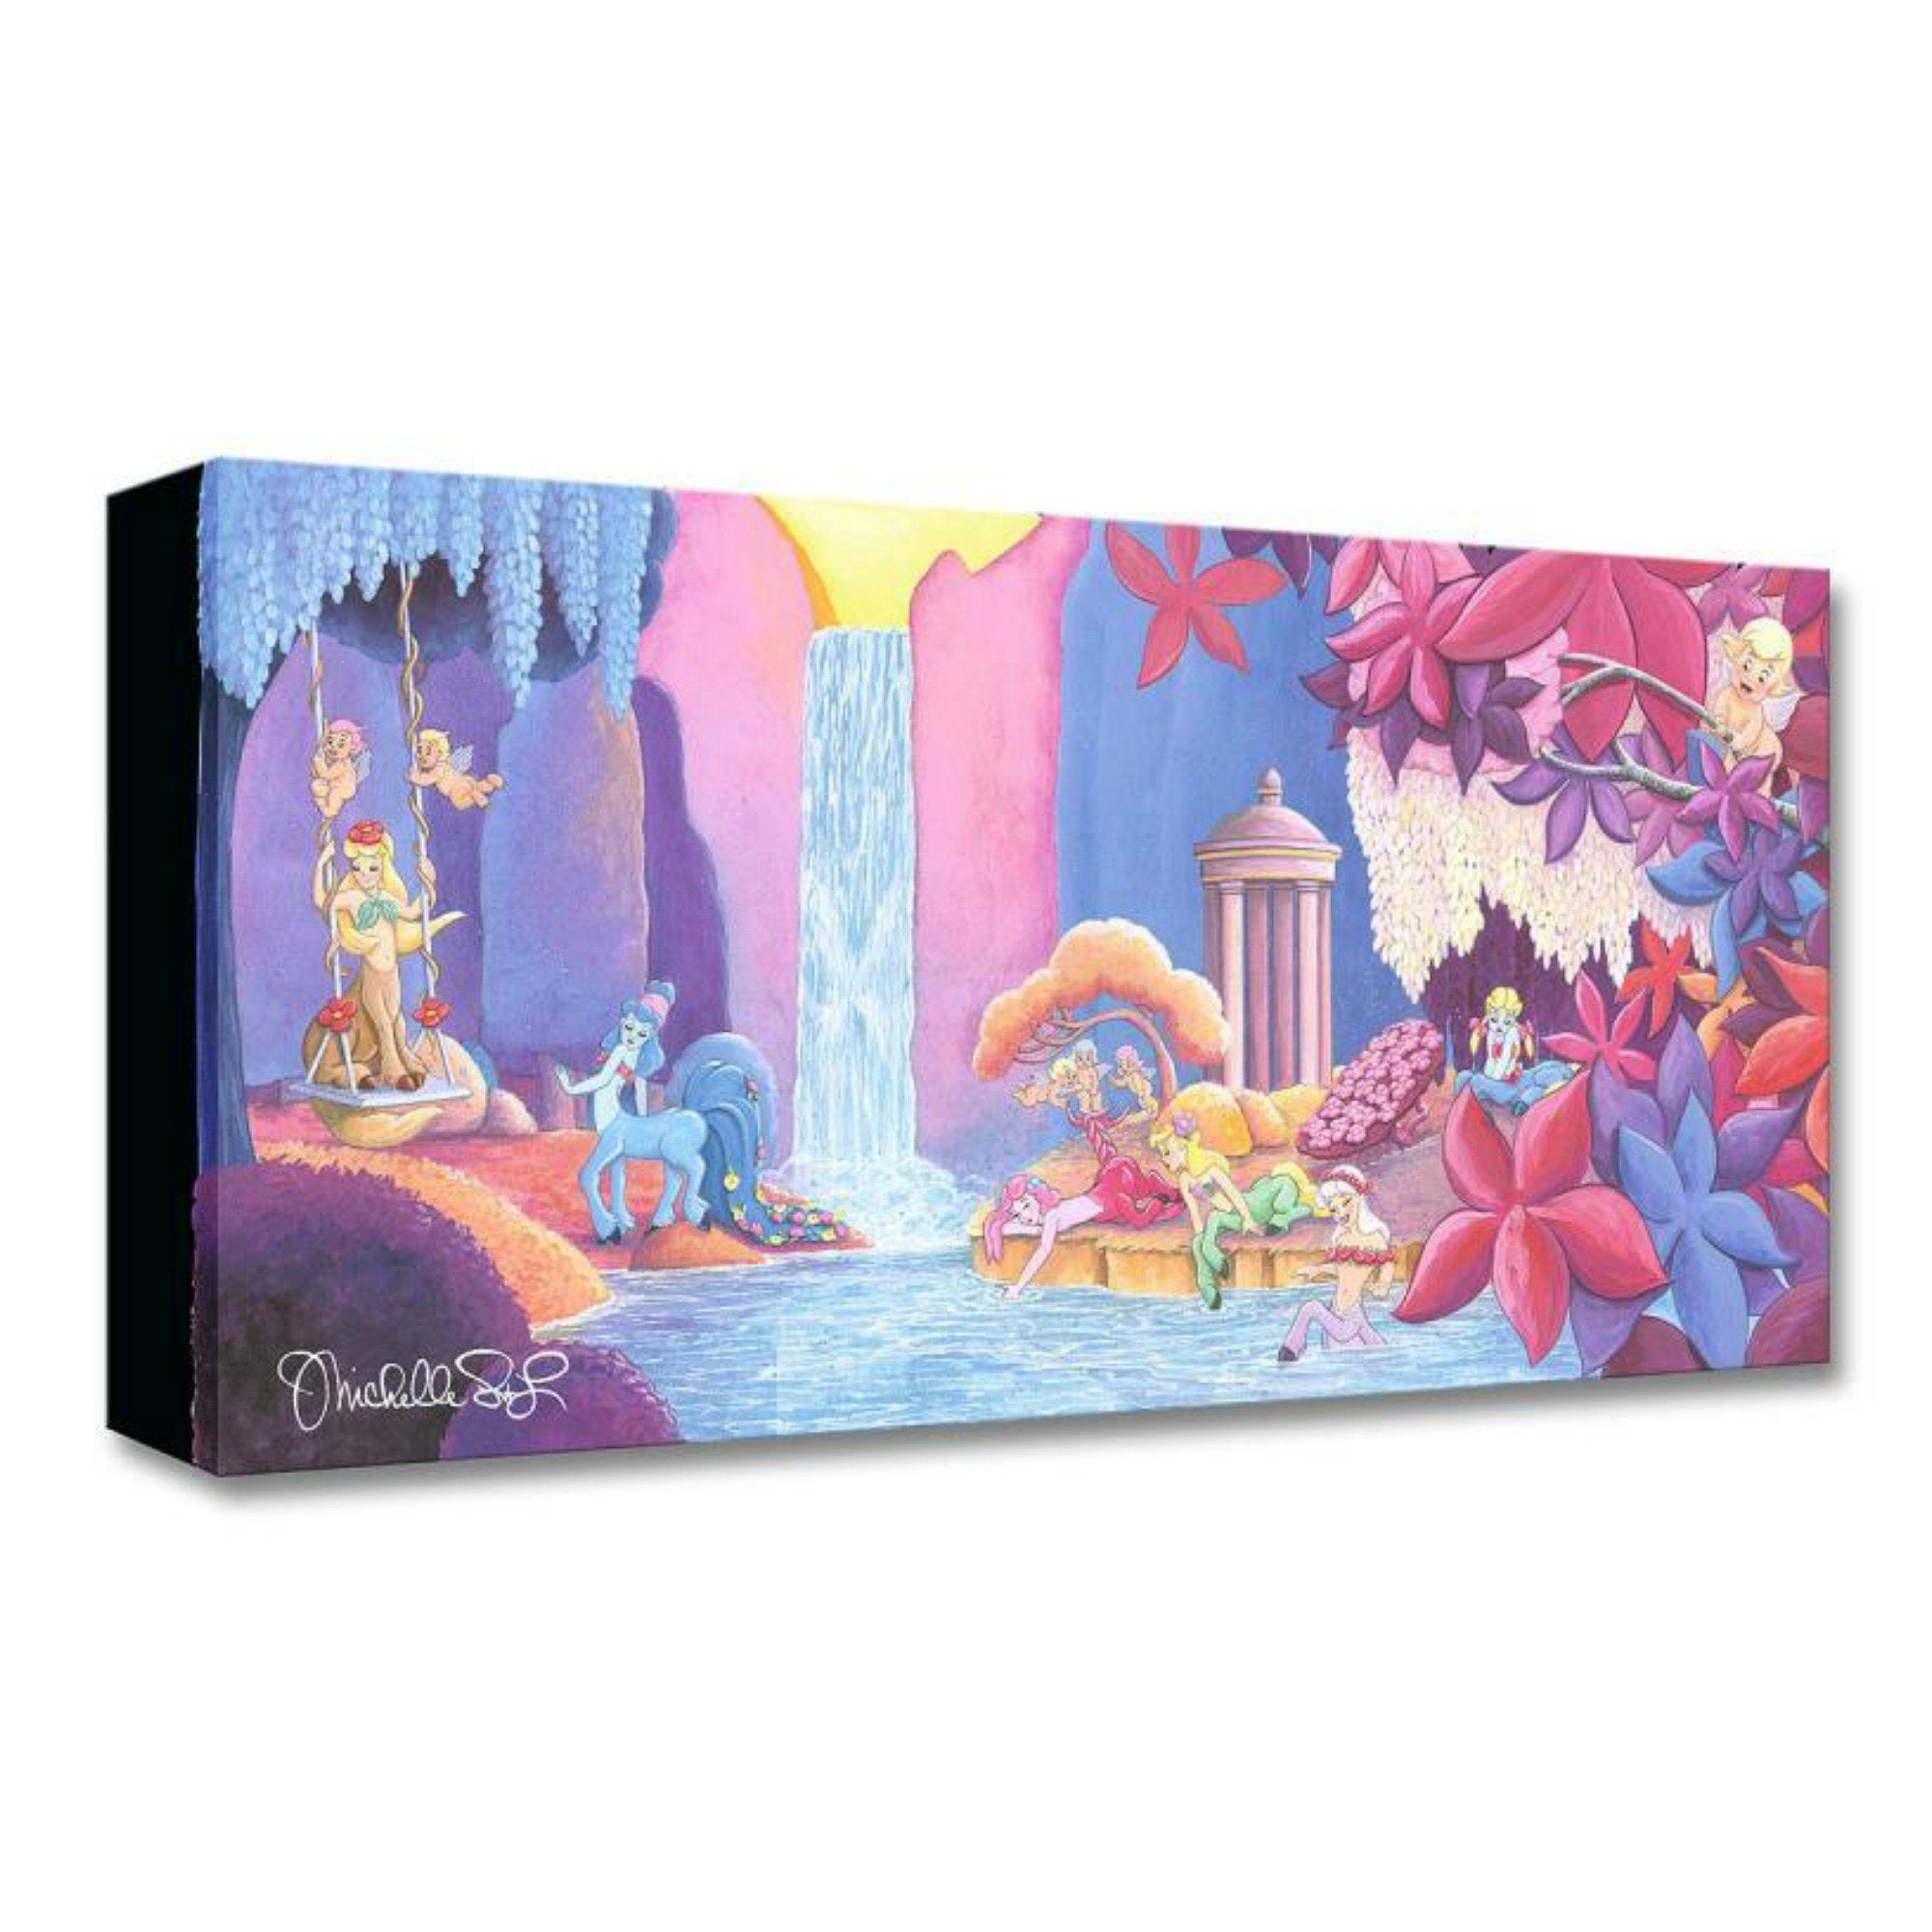 Michelle St Laurent Family Blossoms From Lilo And Stitch Gallery Wrapped  Giclee On Canvas Disney Fine Art